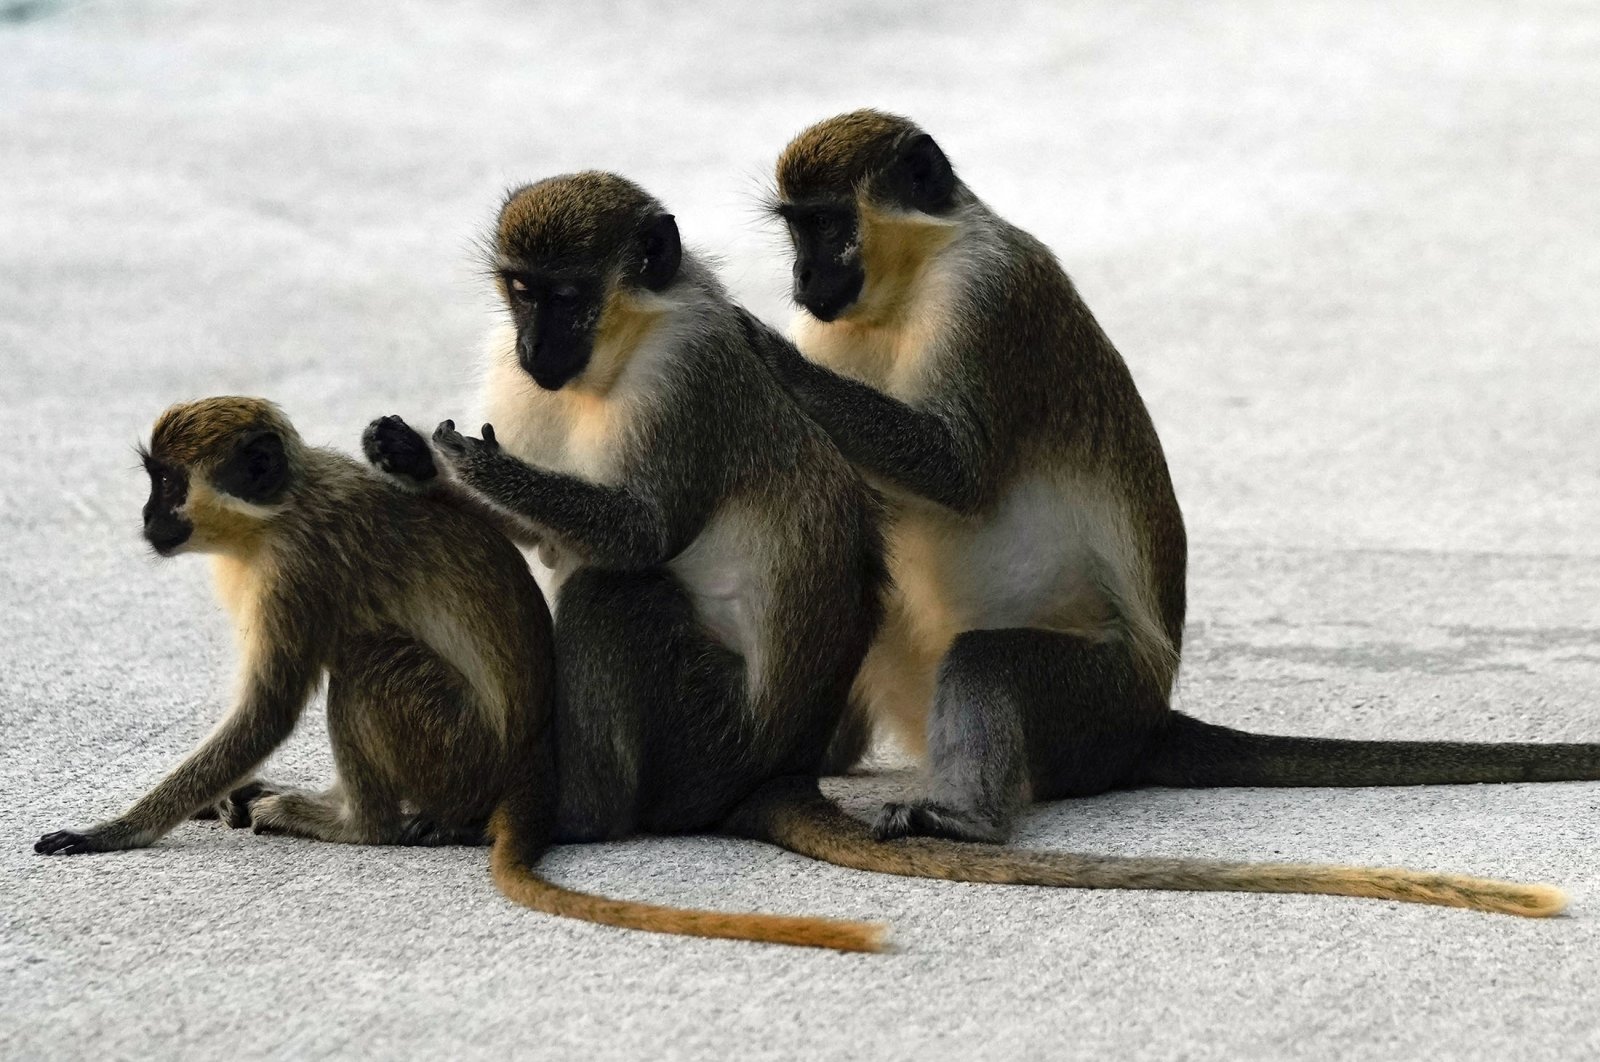 Female vervet monkeys Bella (L), Snow White (C), and Olivia groom each other in the Park &#039;N Fly airport lot adjacent to the mangrove preserve where the vervet monkey colony lives, in Dania Beach, Florida, U.S., March 1, 2022. (AP Photo)